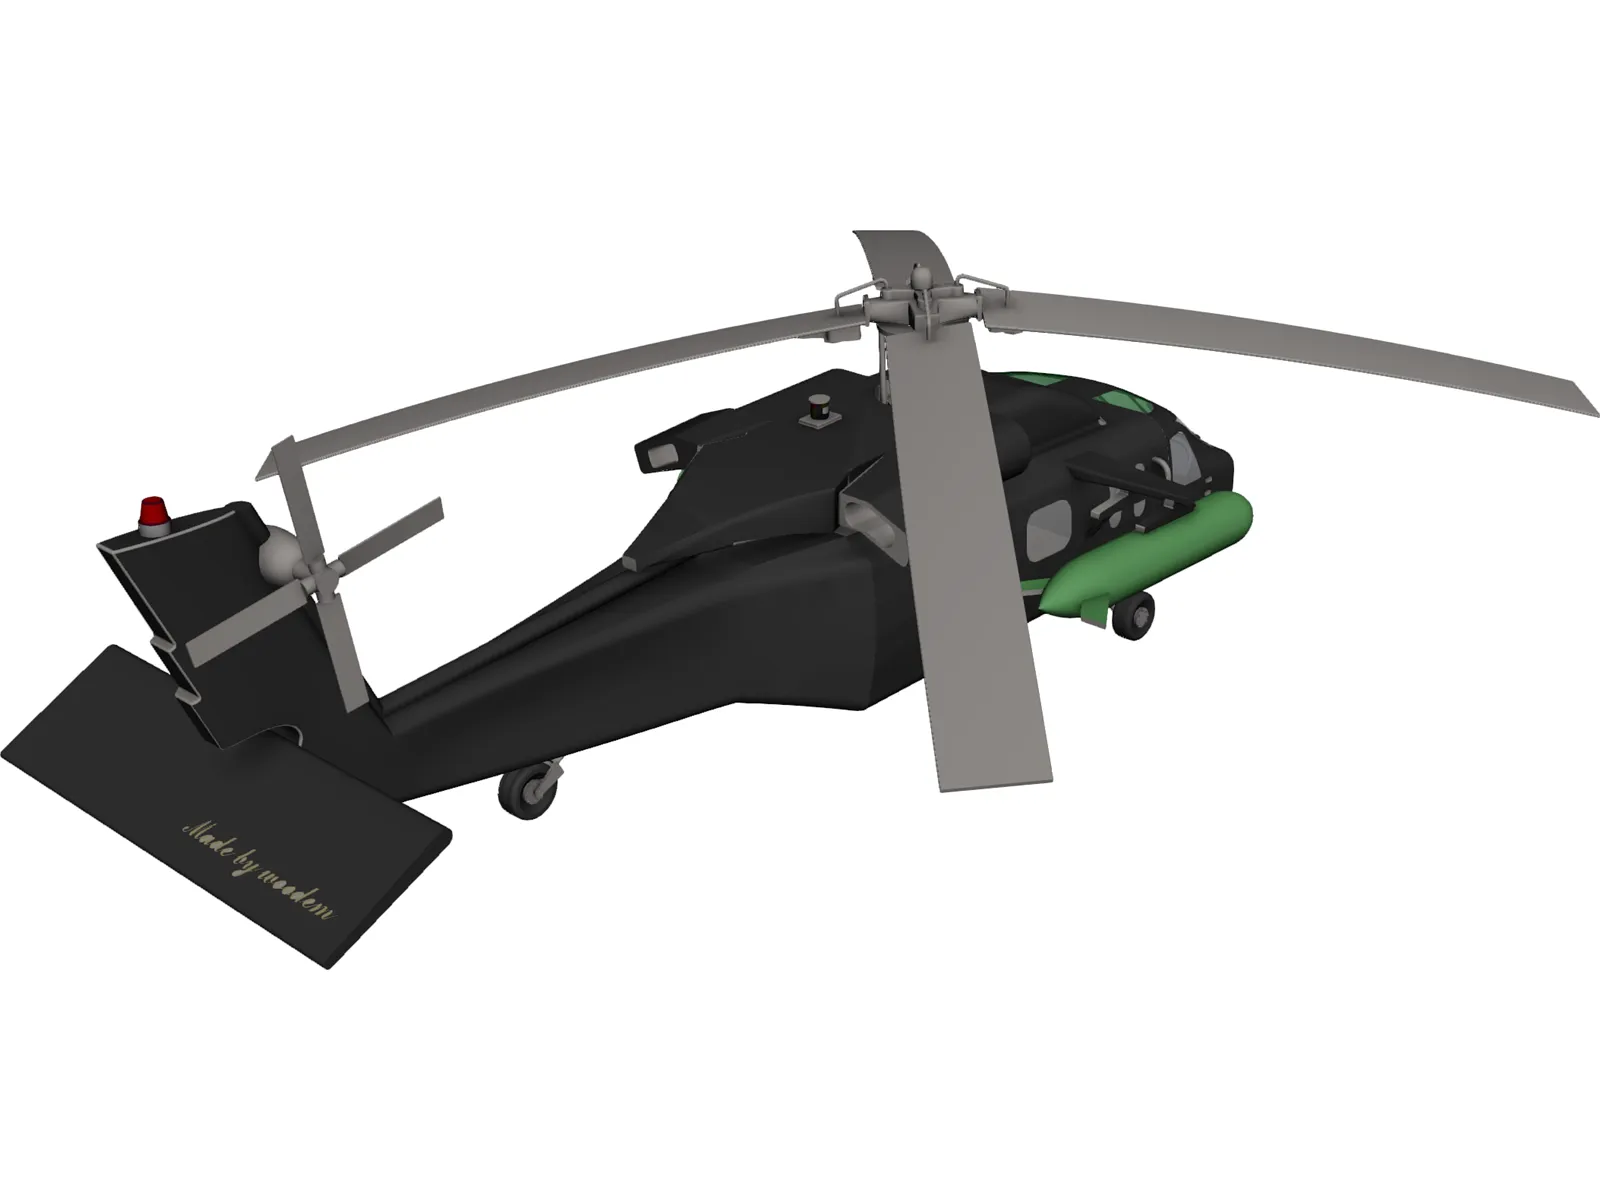 Helicopter Concept 3D Model